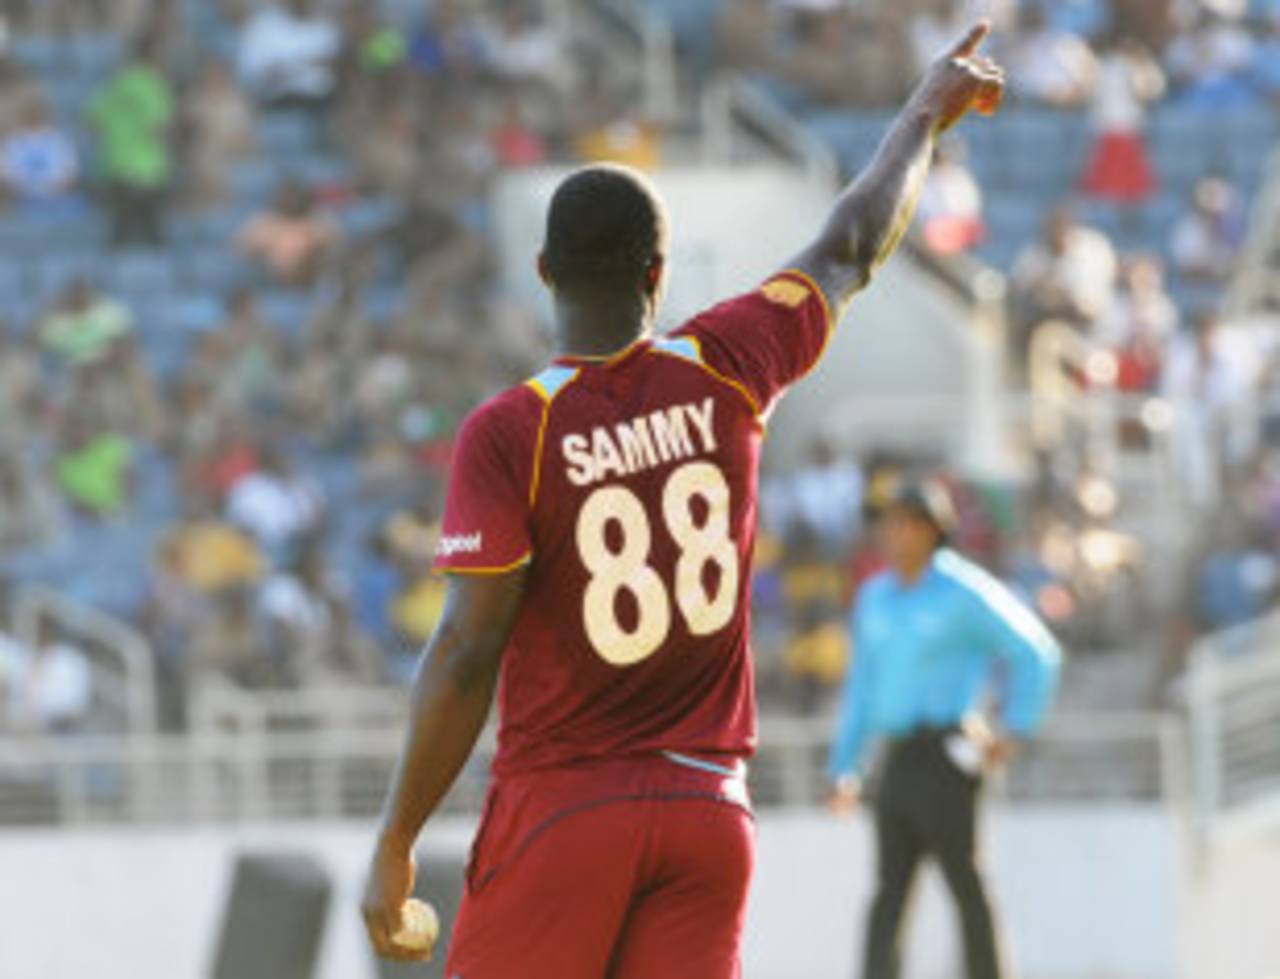 Darren Sammy: under pressure after the dismal tours of India and New Zealand late last year&nbsp;&nbsp;&bull;&nbsp;&nbsp;West Indies Cricket